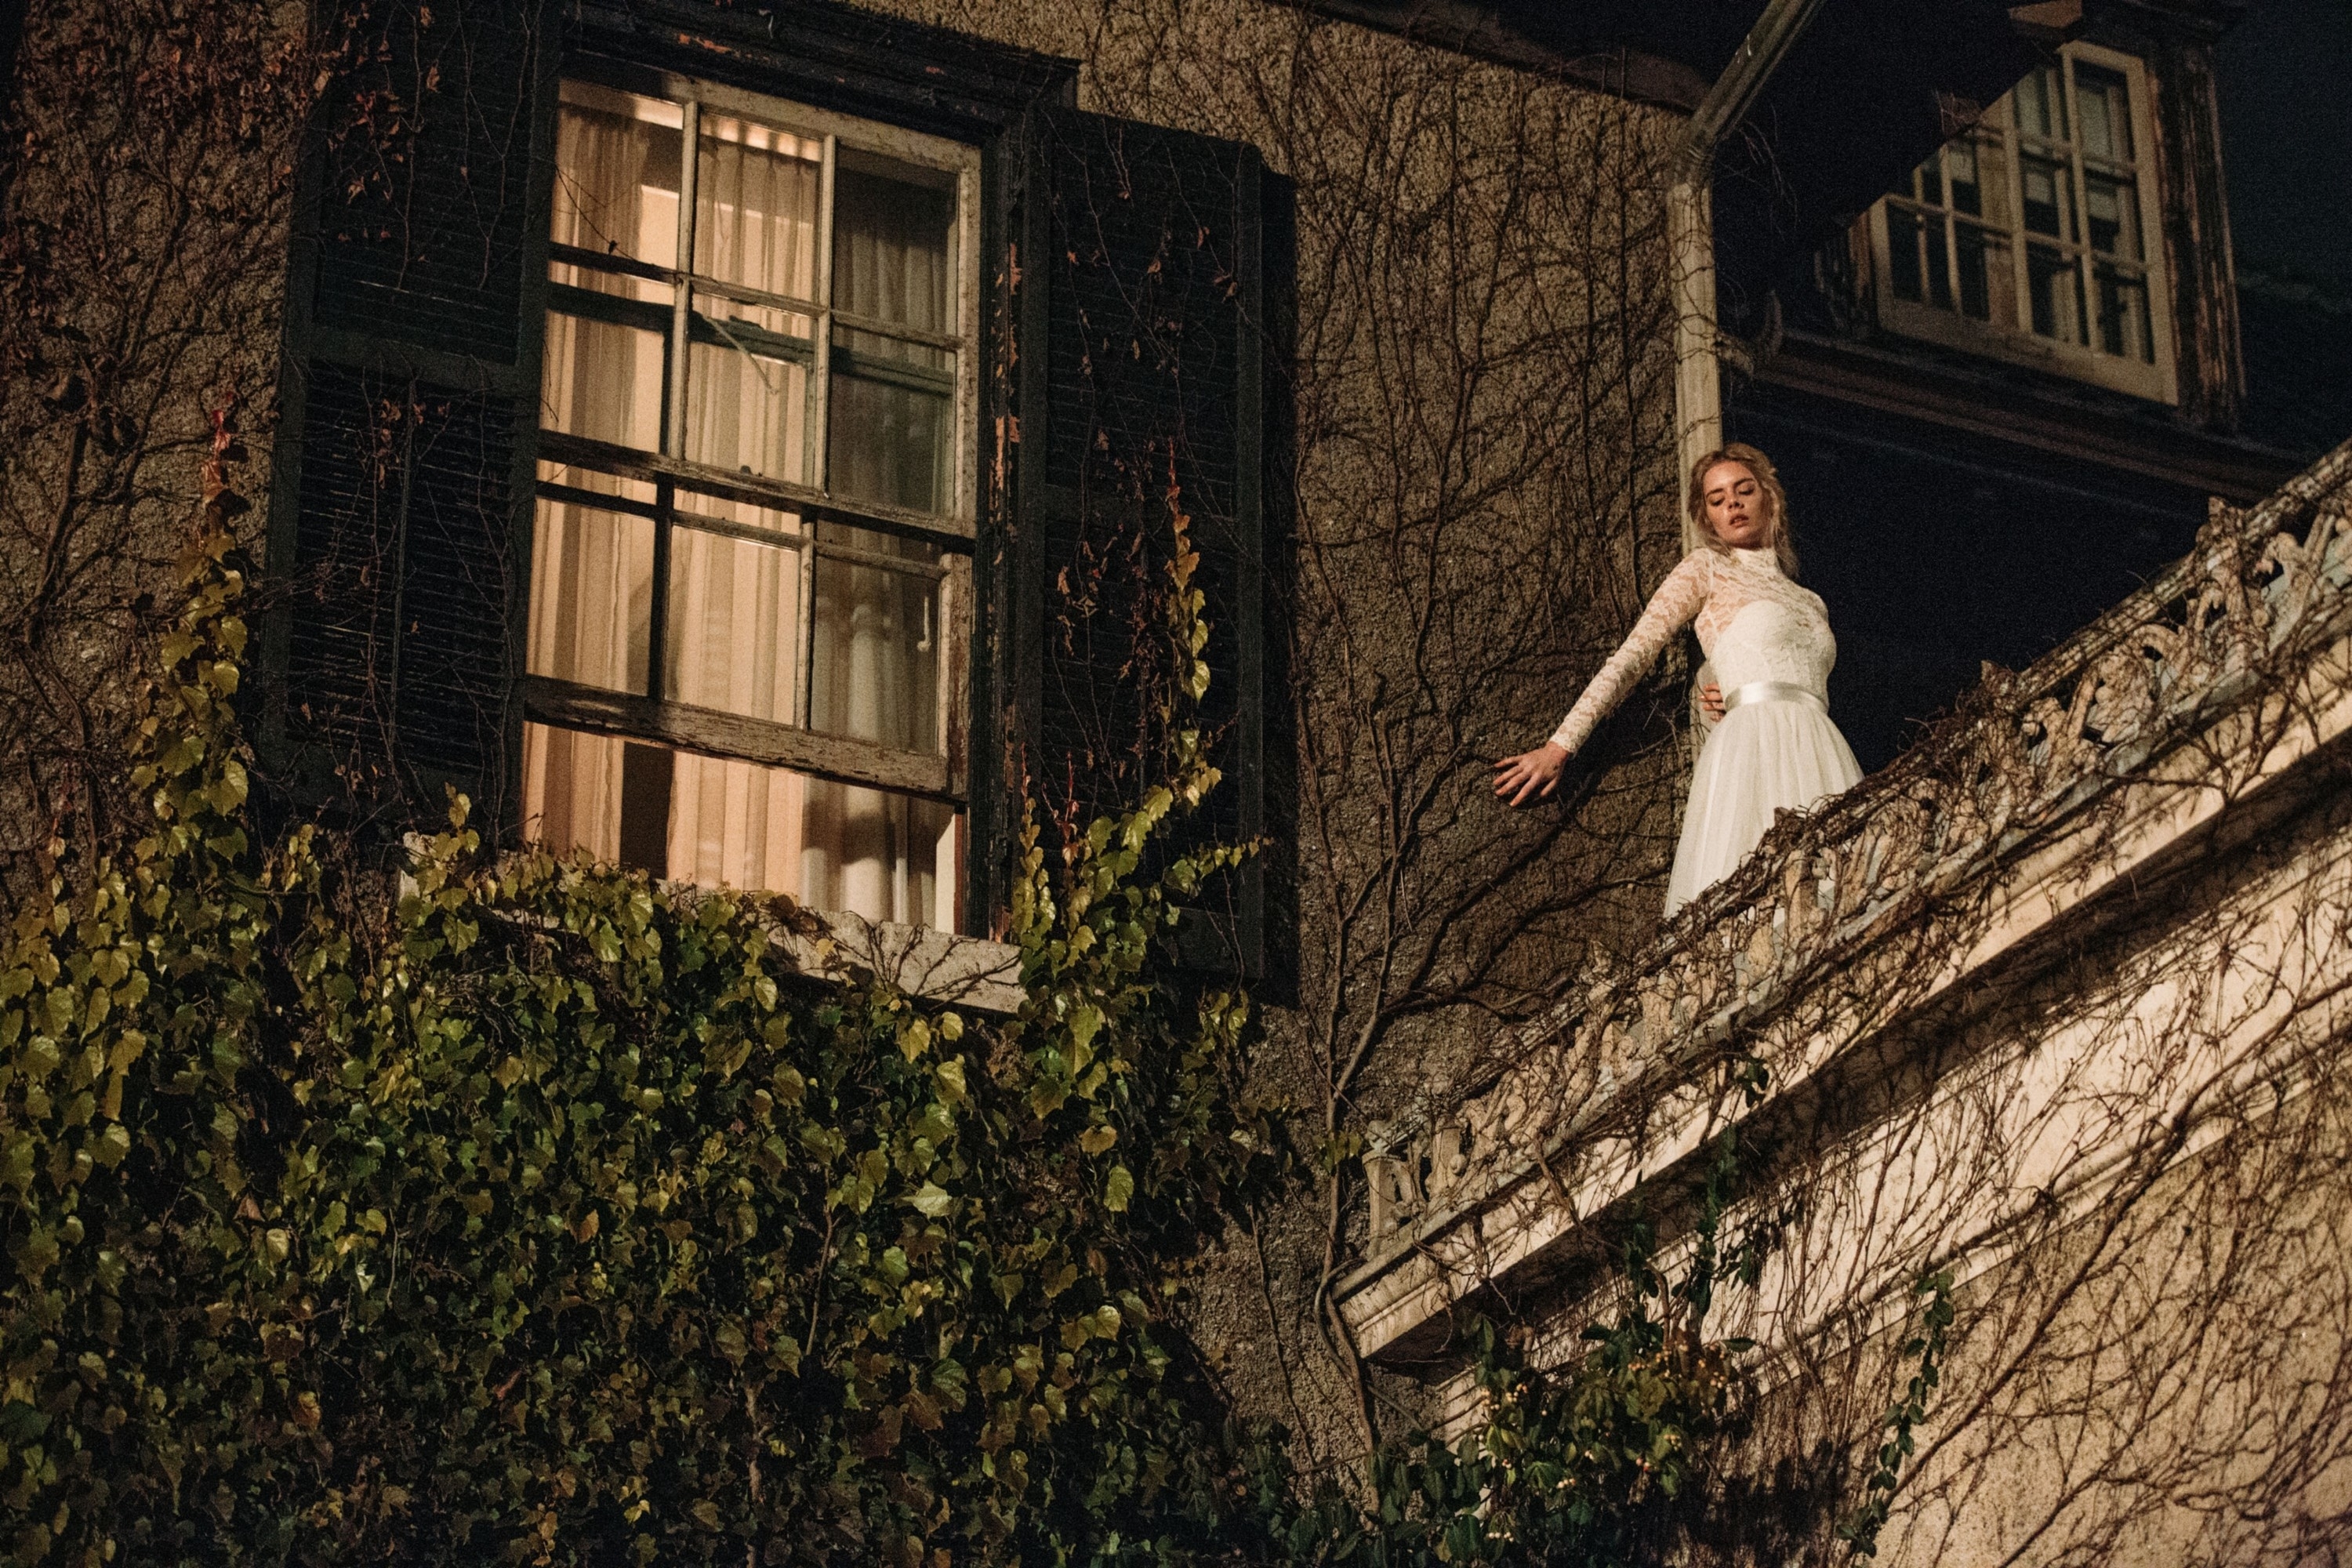 A woman in a wedding dress scaling the side of the building.